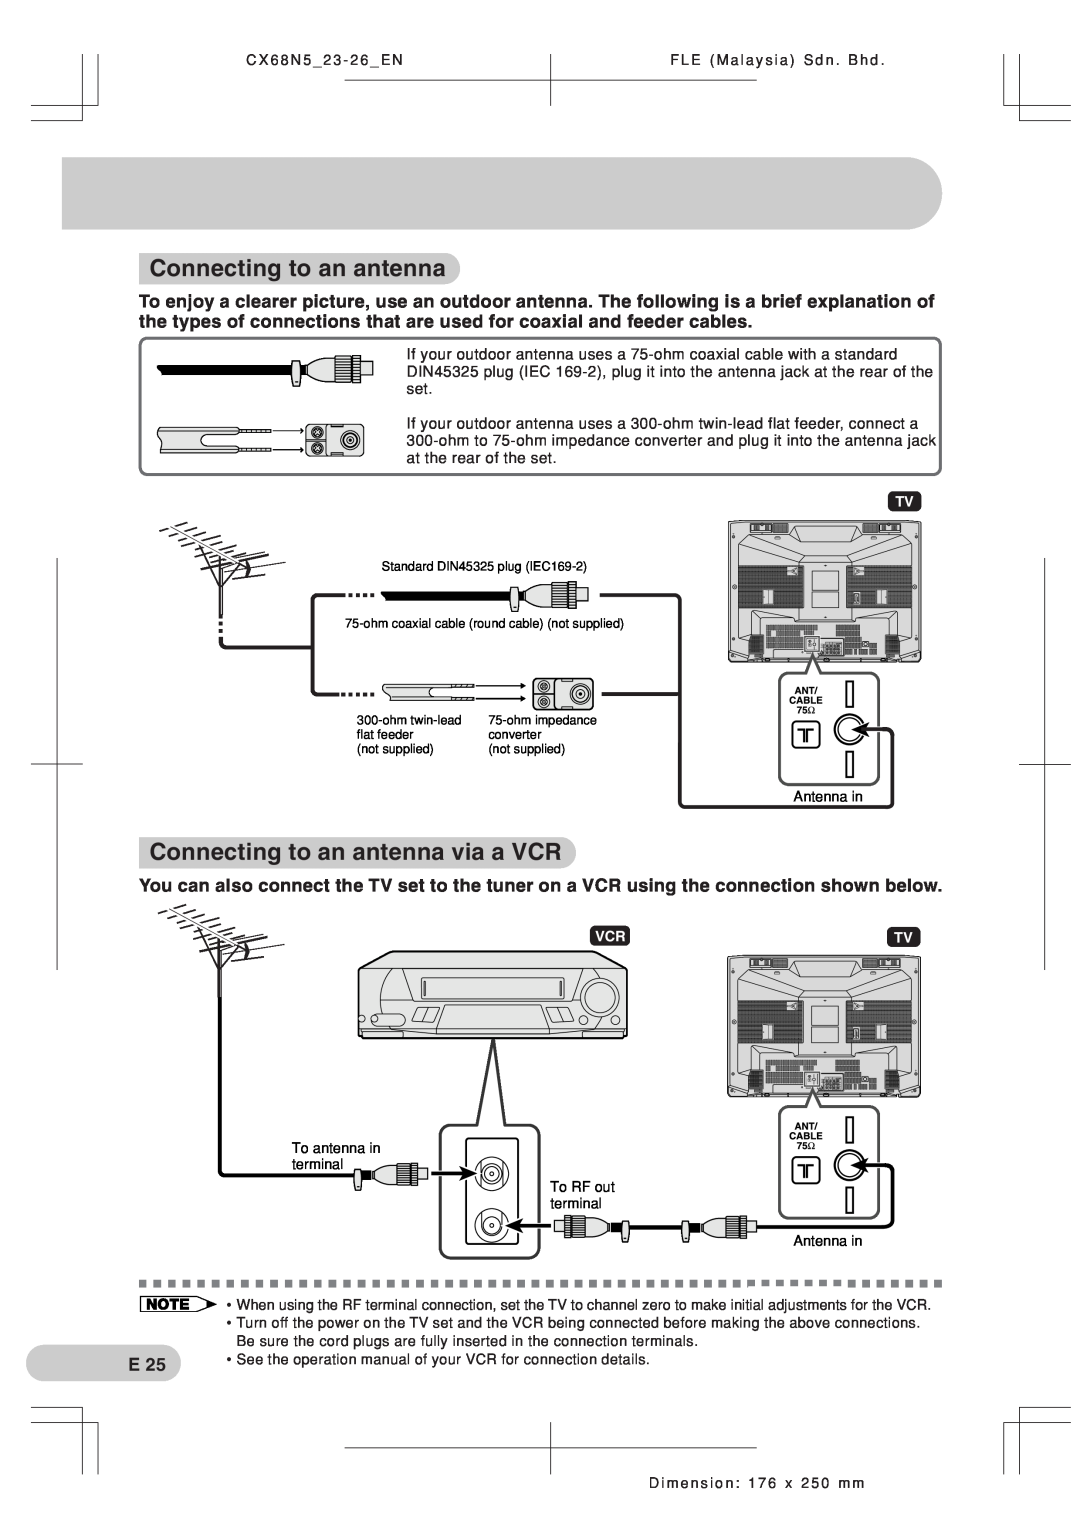 Sharp Cx68n5 operation manual Connecting to an antenna via a VCR 